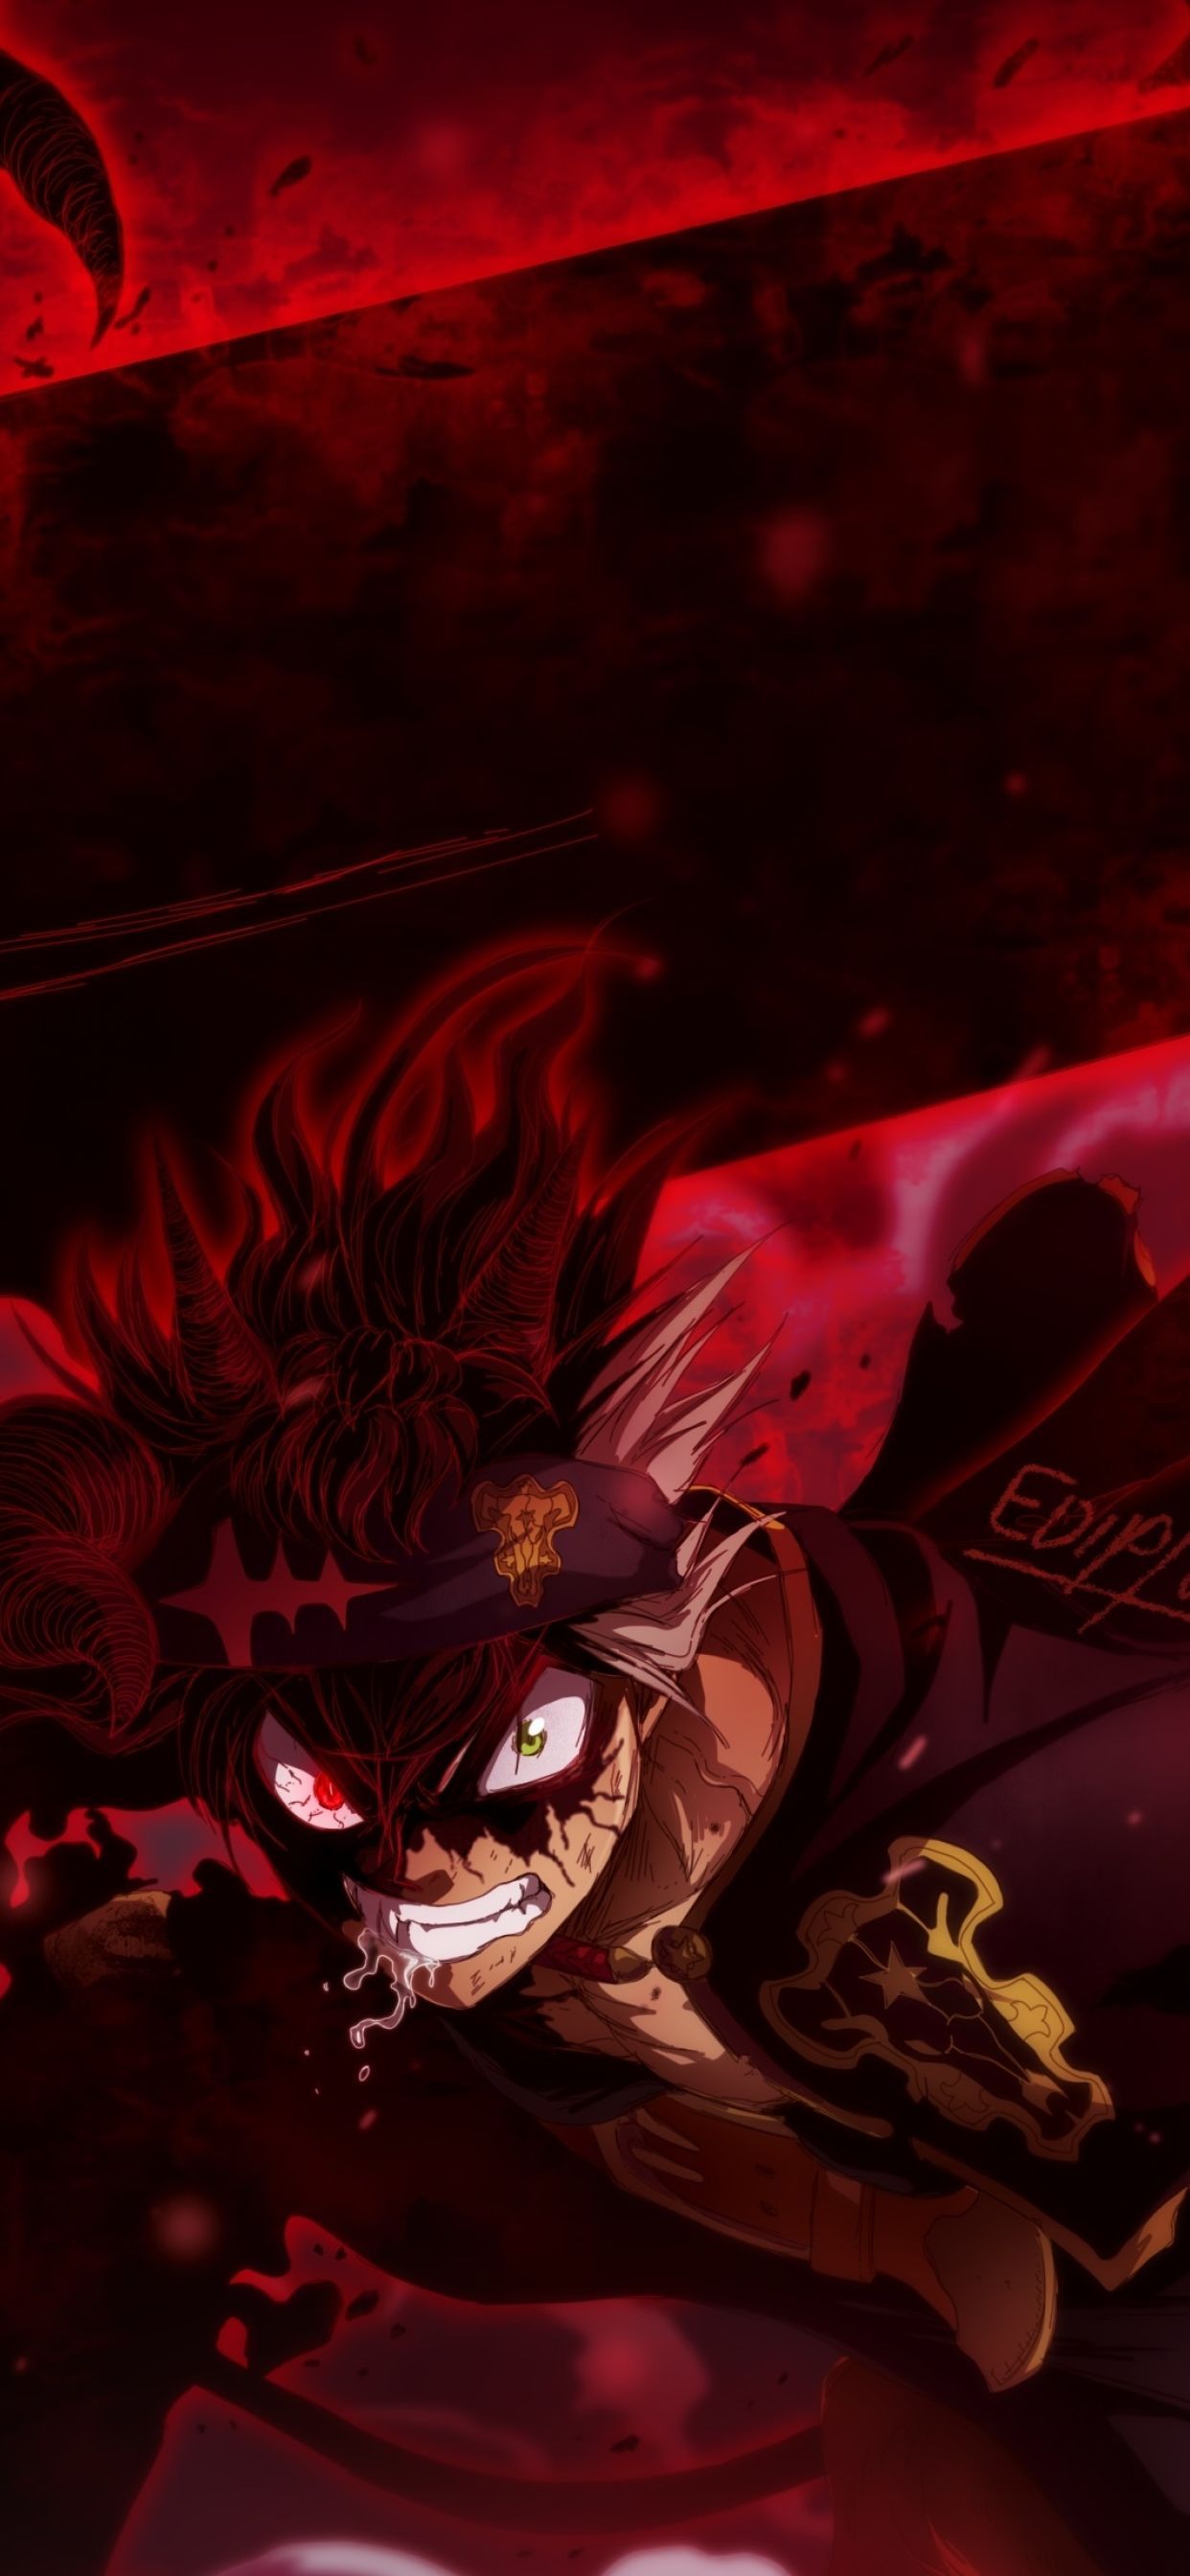 Asta in Black Clover iPhone XS MAX Wallpaper, HD Anime 4K Wallpaper, Image, Photo and Background. Black clover anime, Cute black wallpaper, Cool anime picture